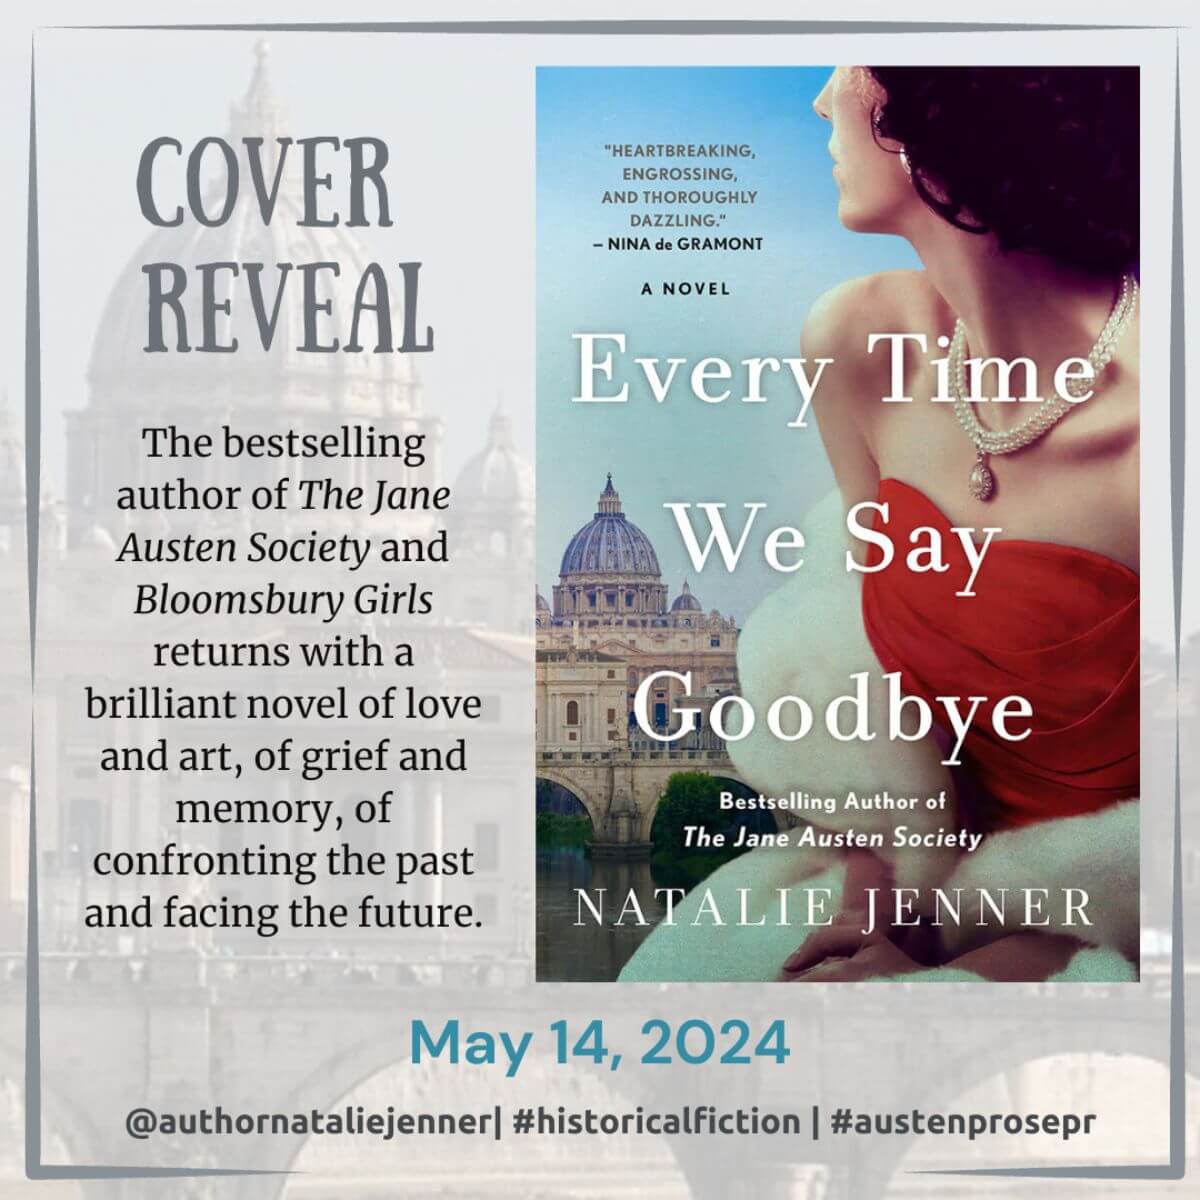 Every Time We Say Goodbye Cover Reveal Graphic with release date of May 14, 2024. The book cover has a woman wearing a glamorous 1950s dress.